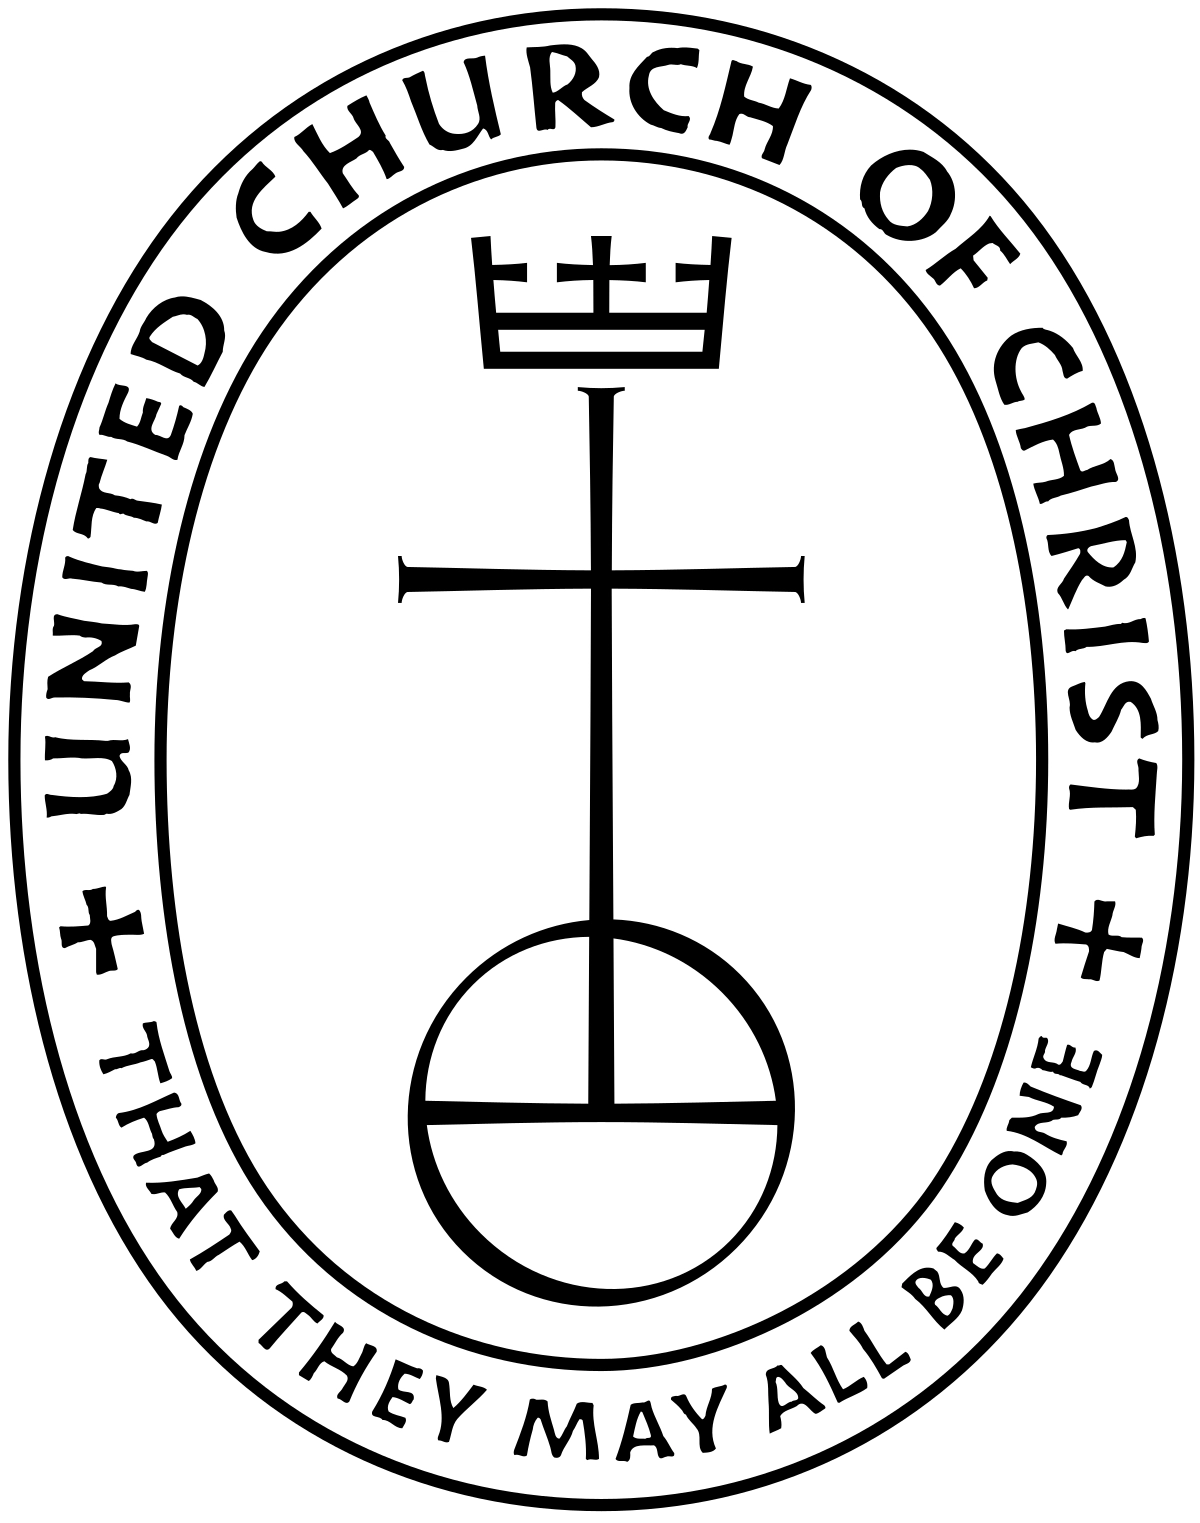 The emblem of the United Church of Christ